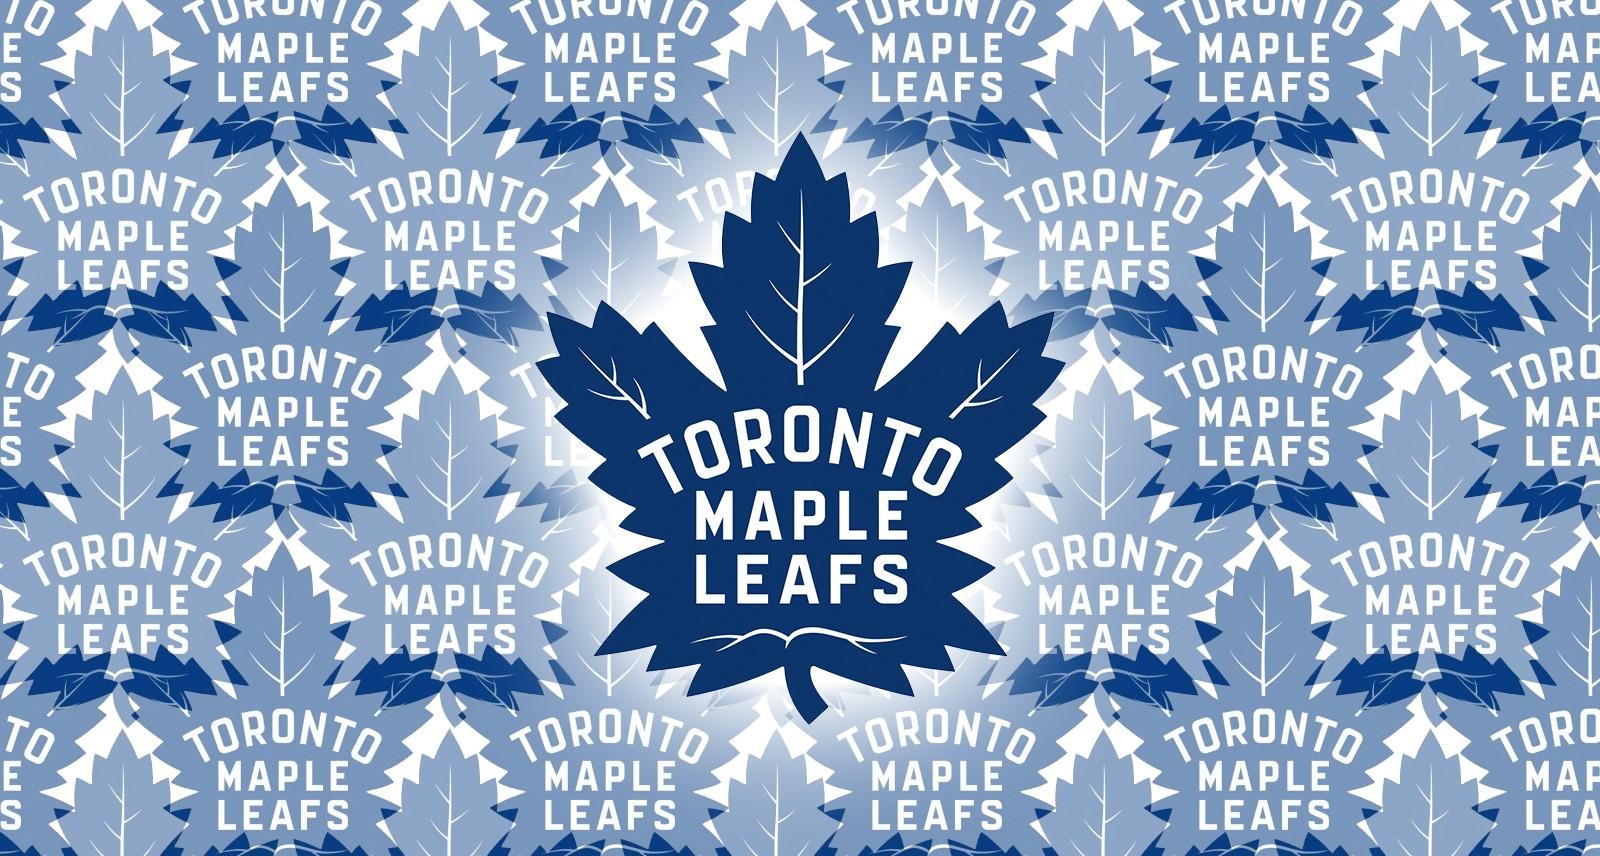 Toronto Maple Leaves Logo - Here's Your First Look at the New Toronto Maple Leafs Logo | Sharp ...